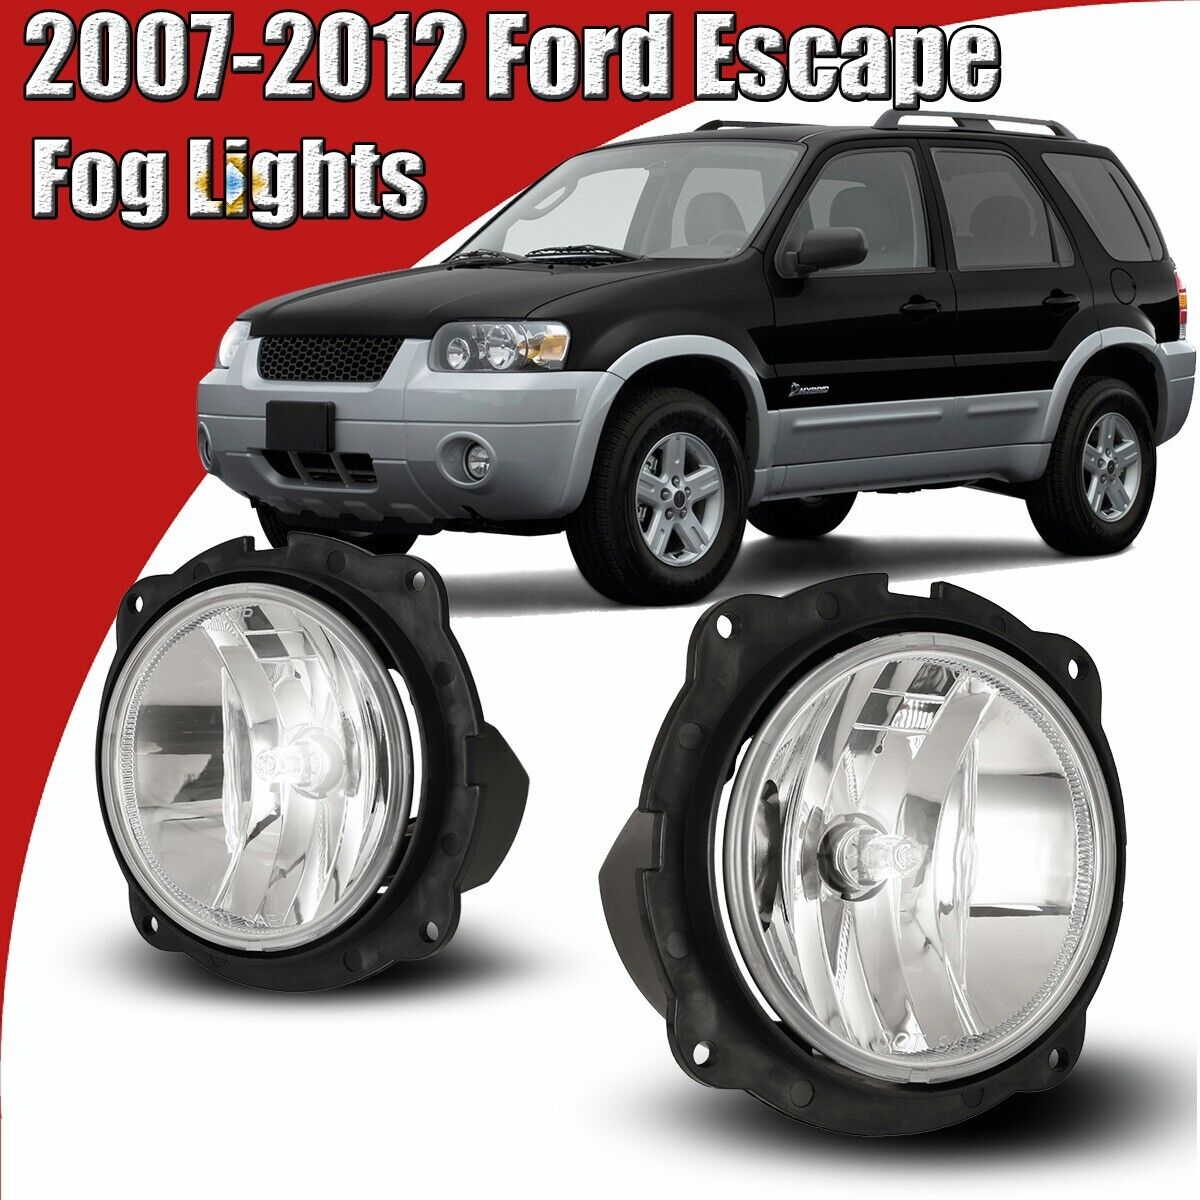 For 2007-2012 Ford Escape Fog Lights Driving Front Bumper Lamps w/Wiring Kits